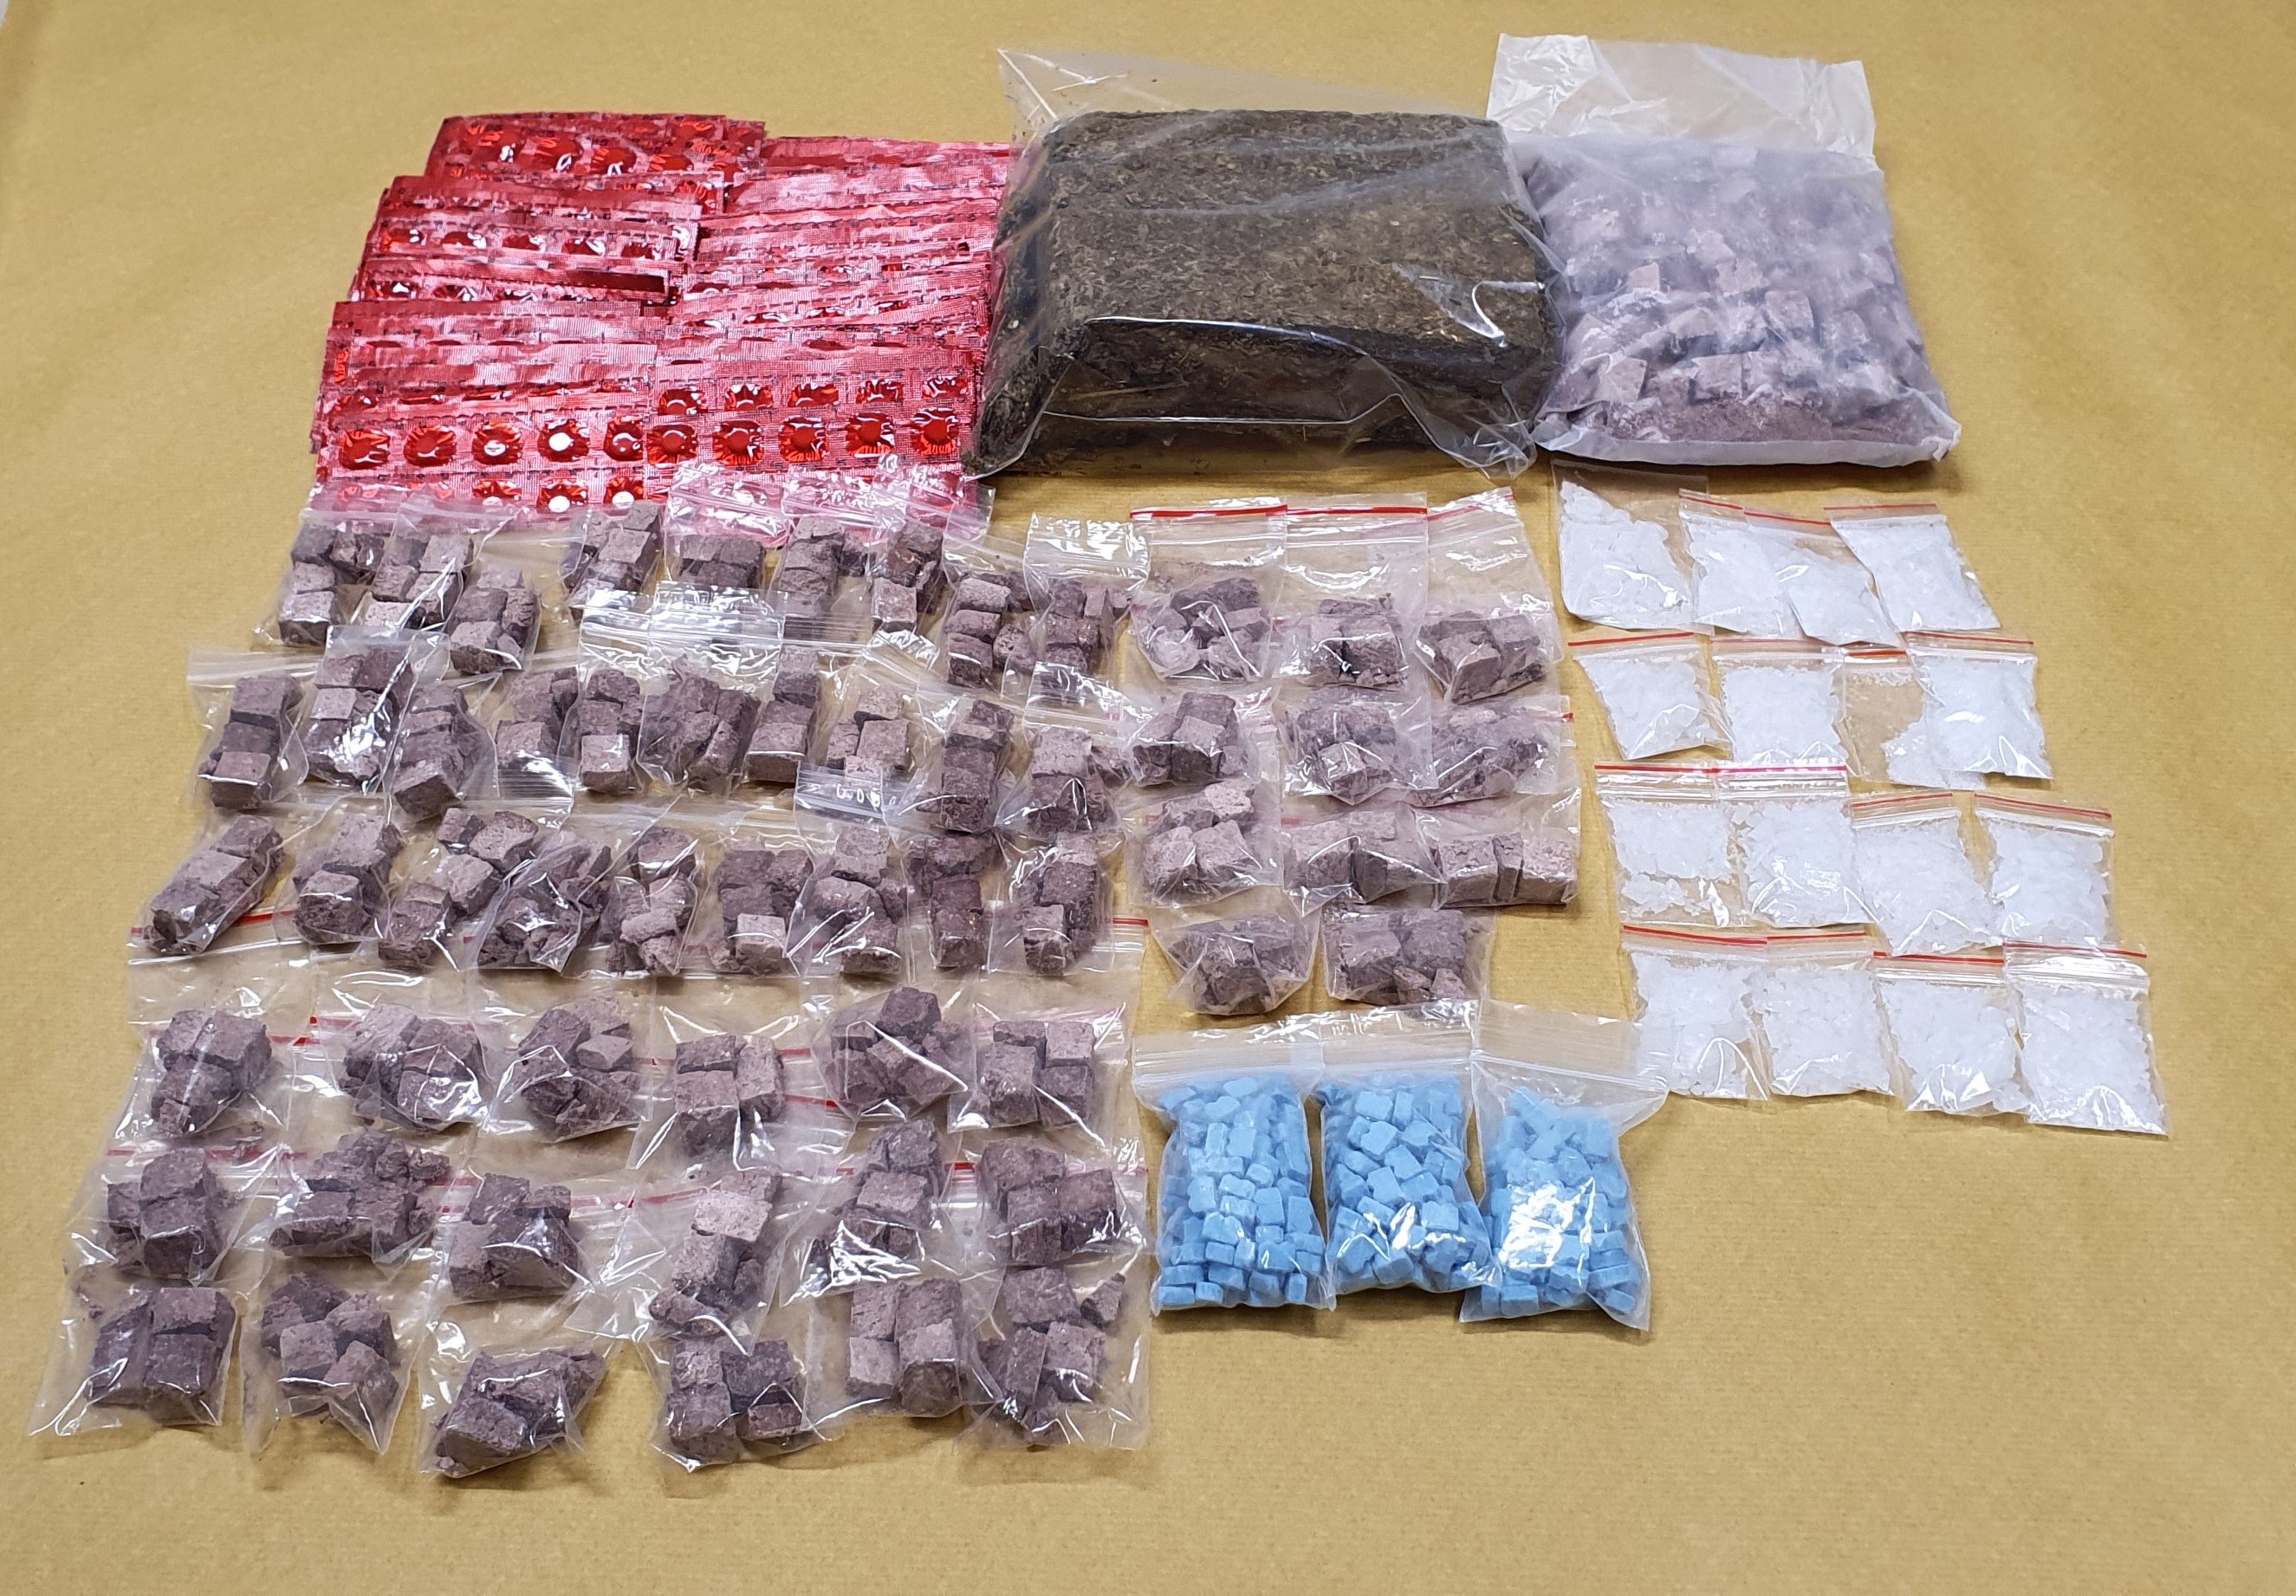 Photo 1 (CNB): Some of the drugs seized during CNB’s operation on 13 February 2020